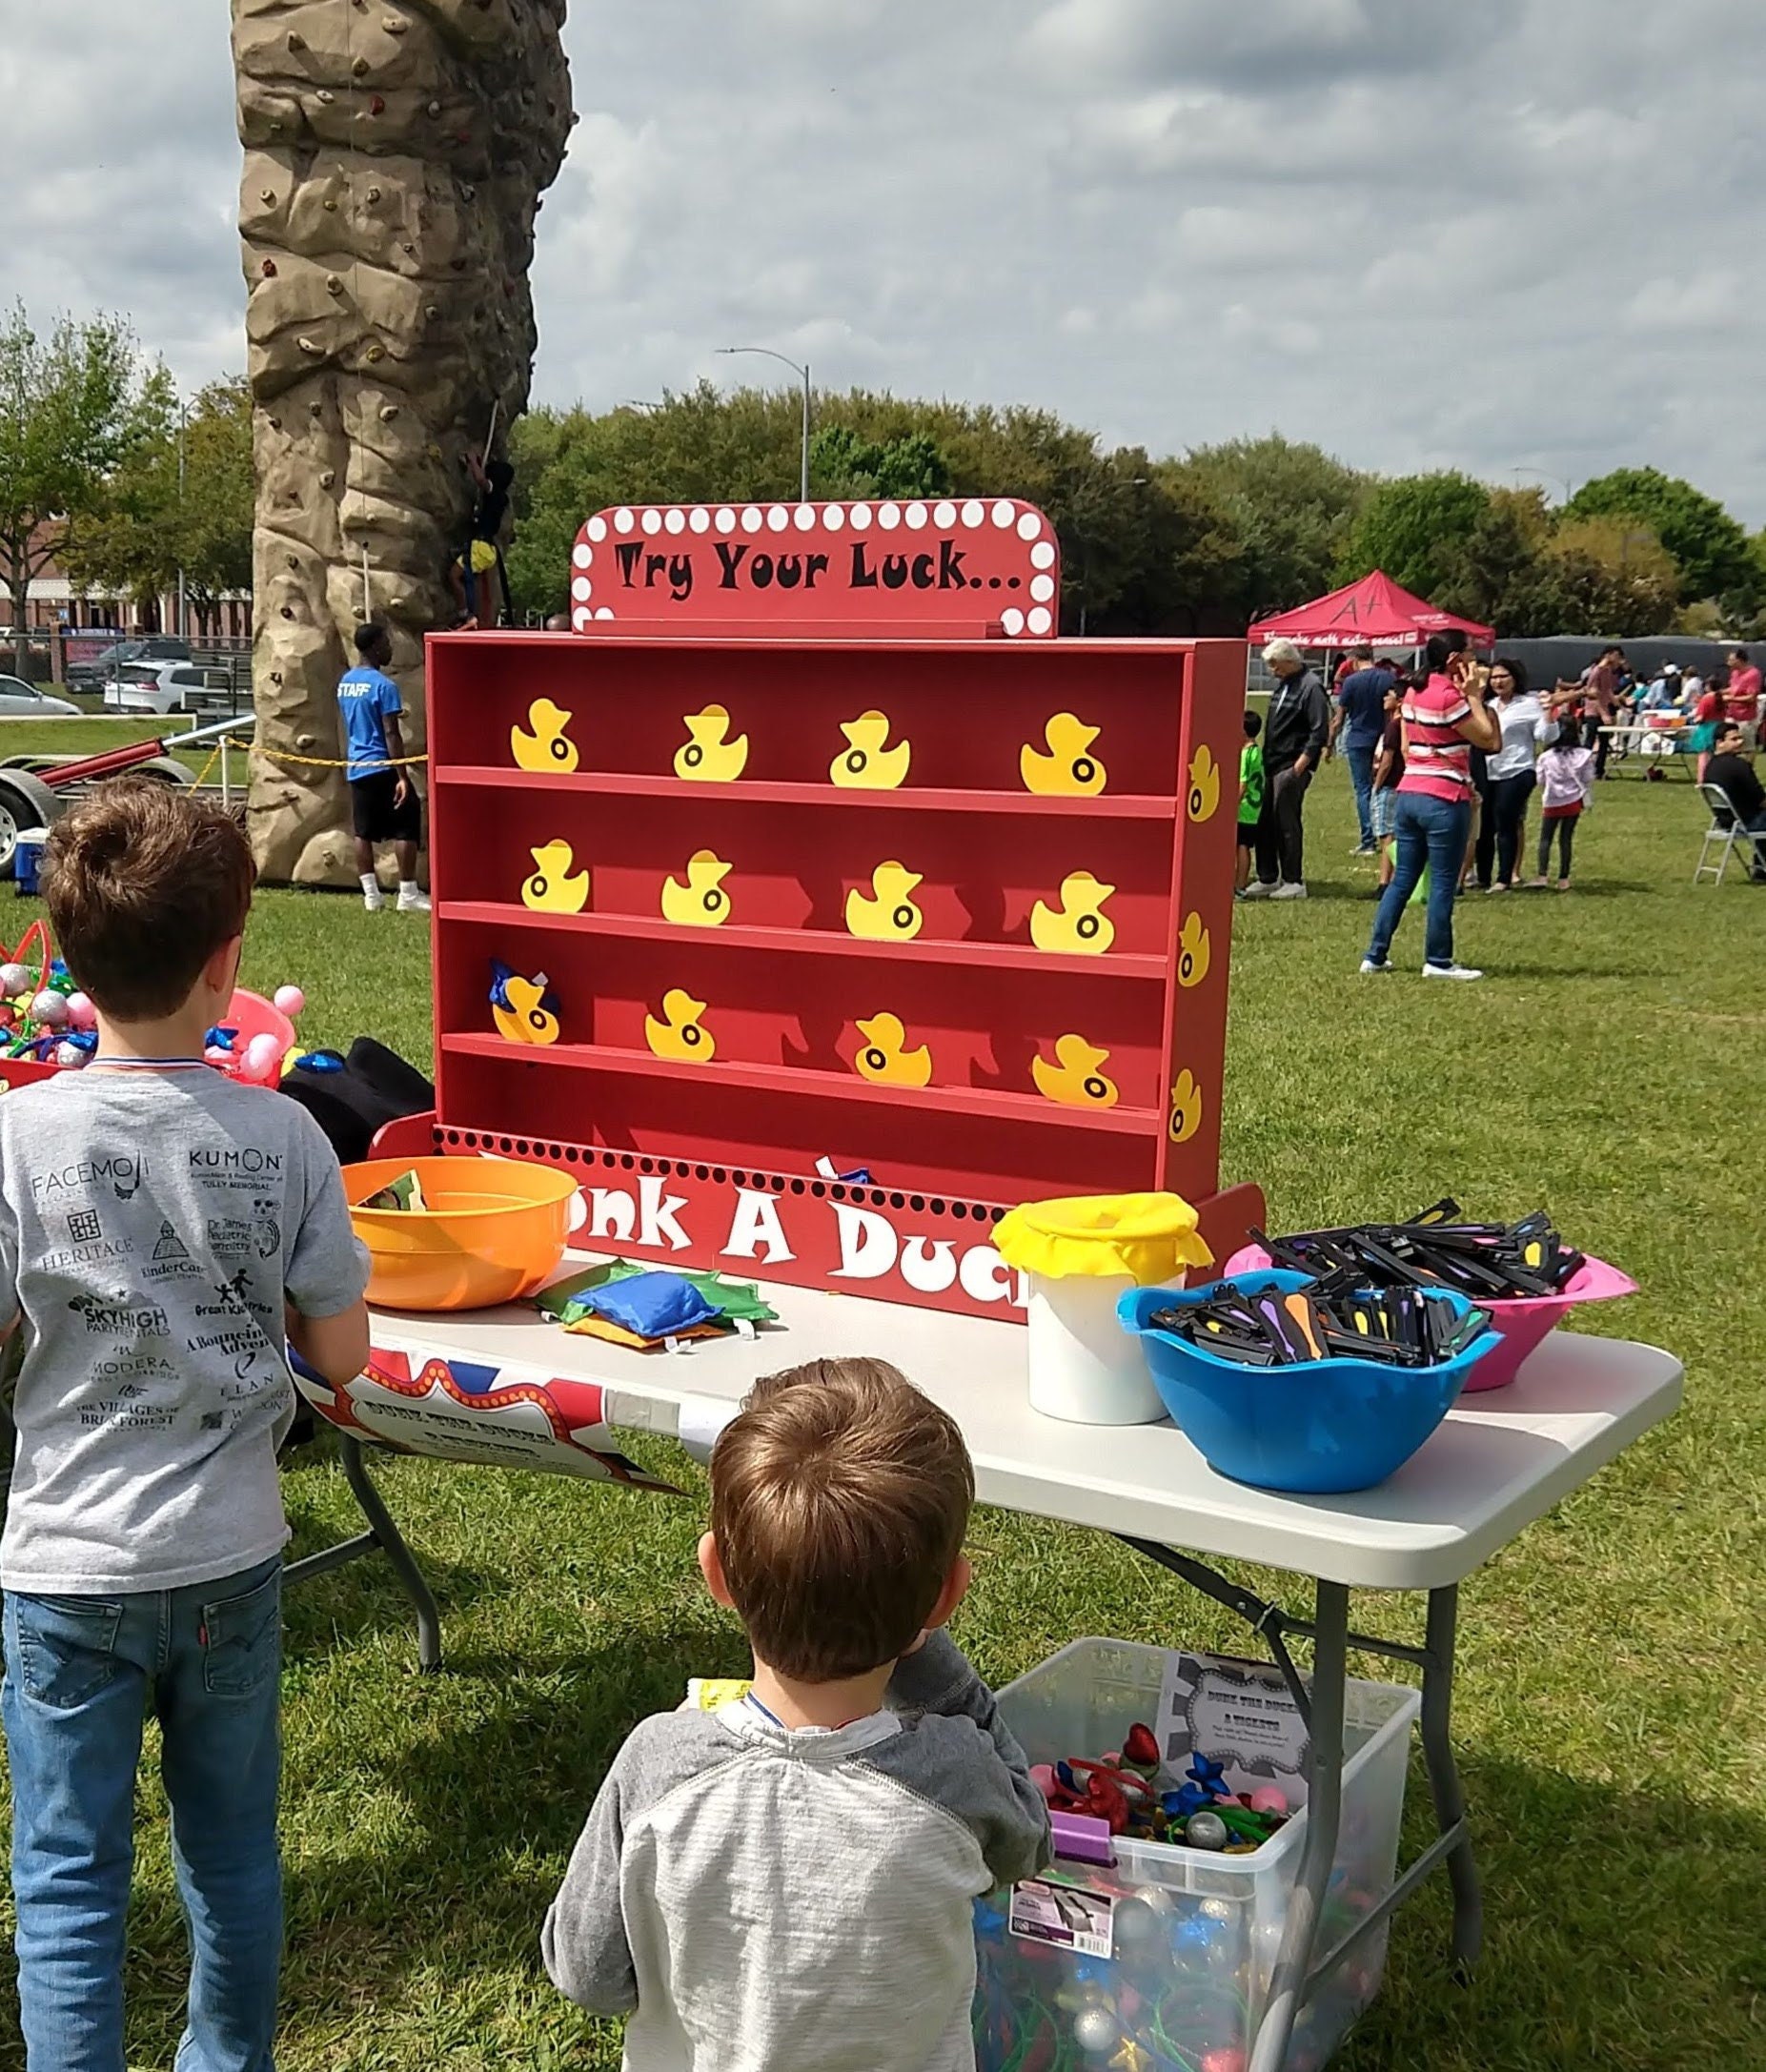 Target Gallery, Duck Shooting Gallery, Dunk a Duck Game, Lawn Games,  Carnival Games, Backyard Game, Carnival Booth Game, Birthday Party Game -   Canada